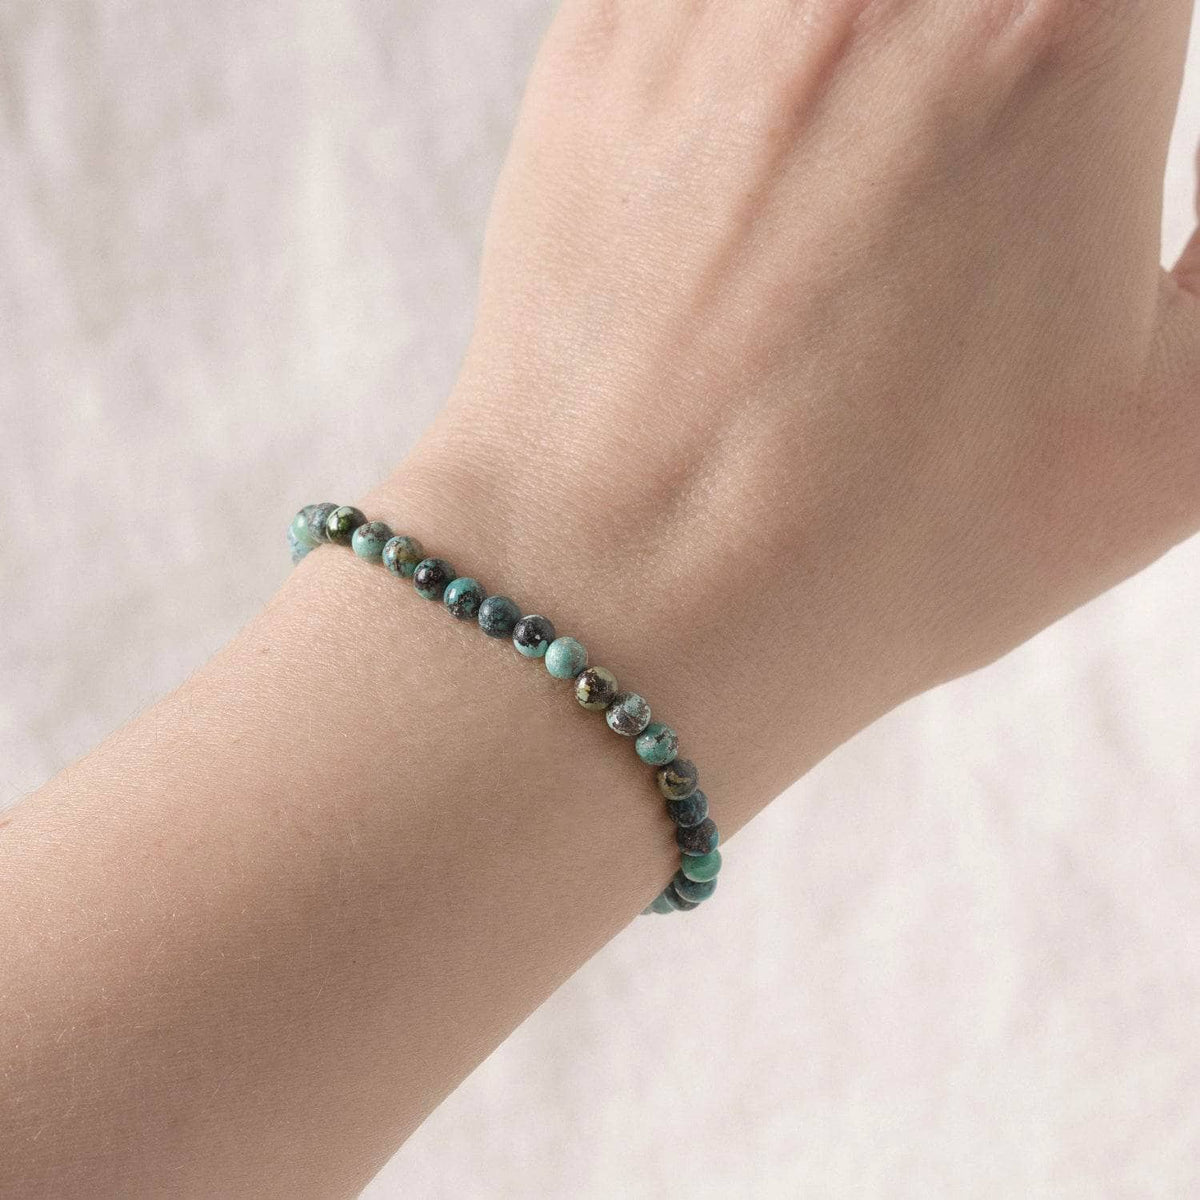 Real Genuine Turquoise Energy Bracelet by Tiny Rituals